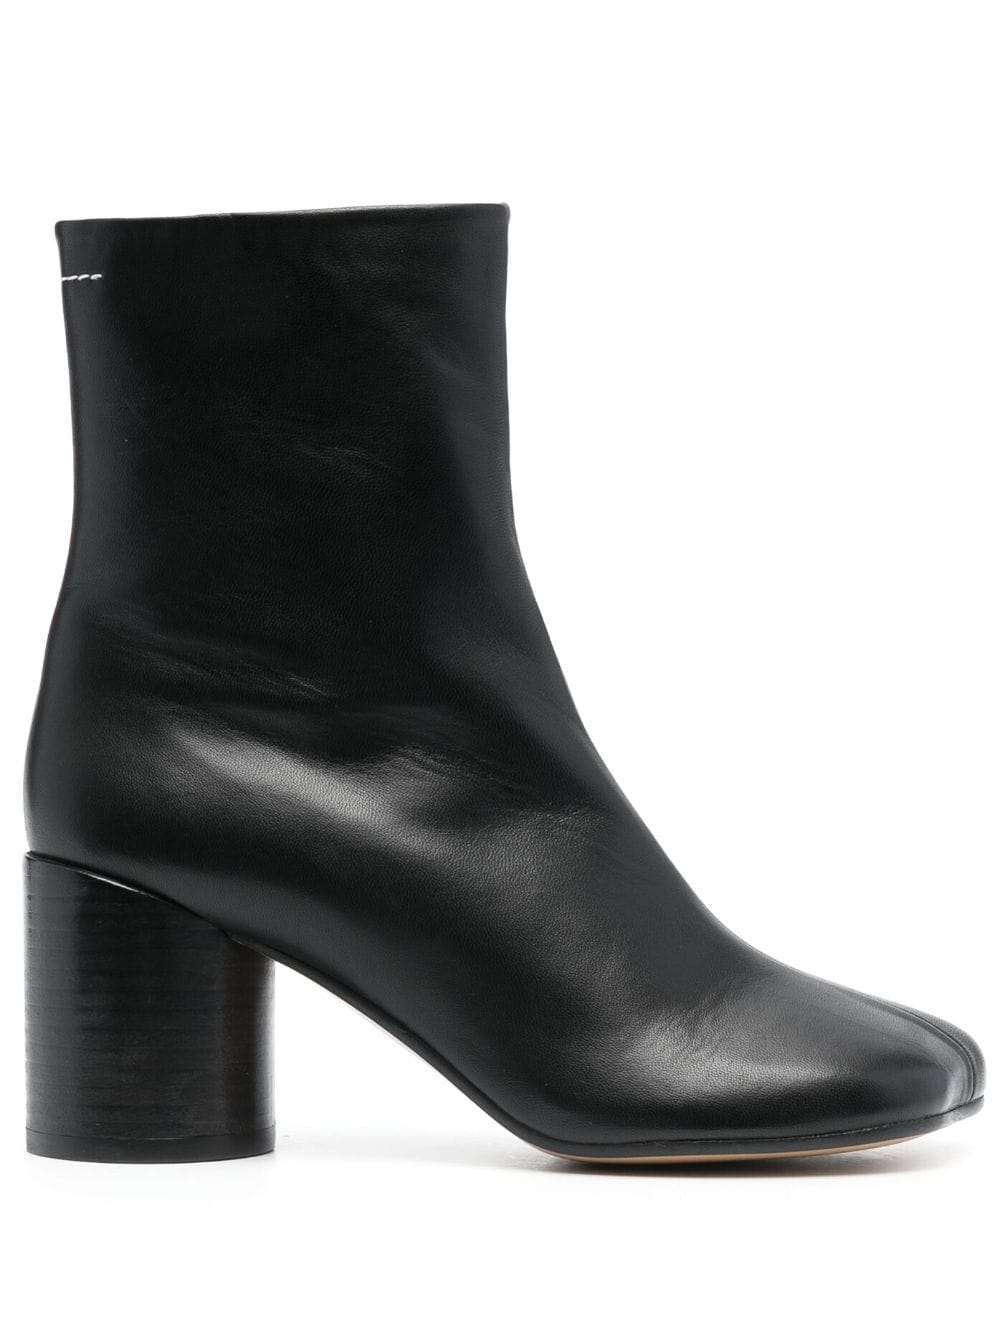 MM6 MAISON MARGIELA Black Leather Ankle Boots for Women - SS24 Collection